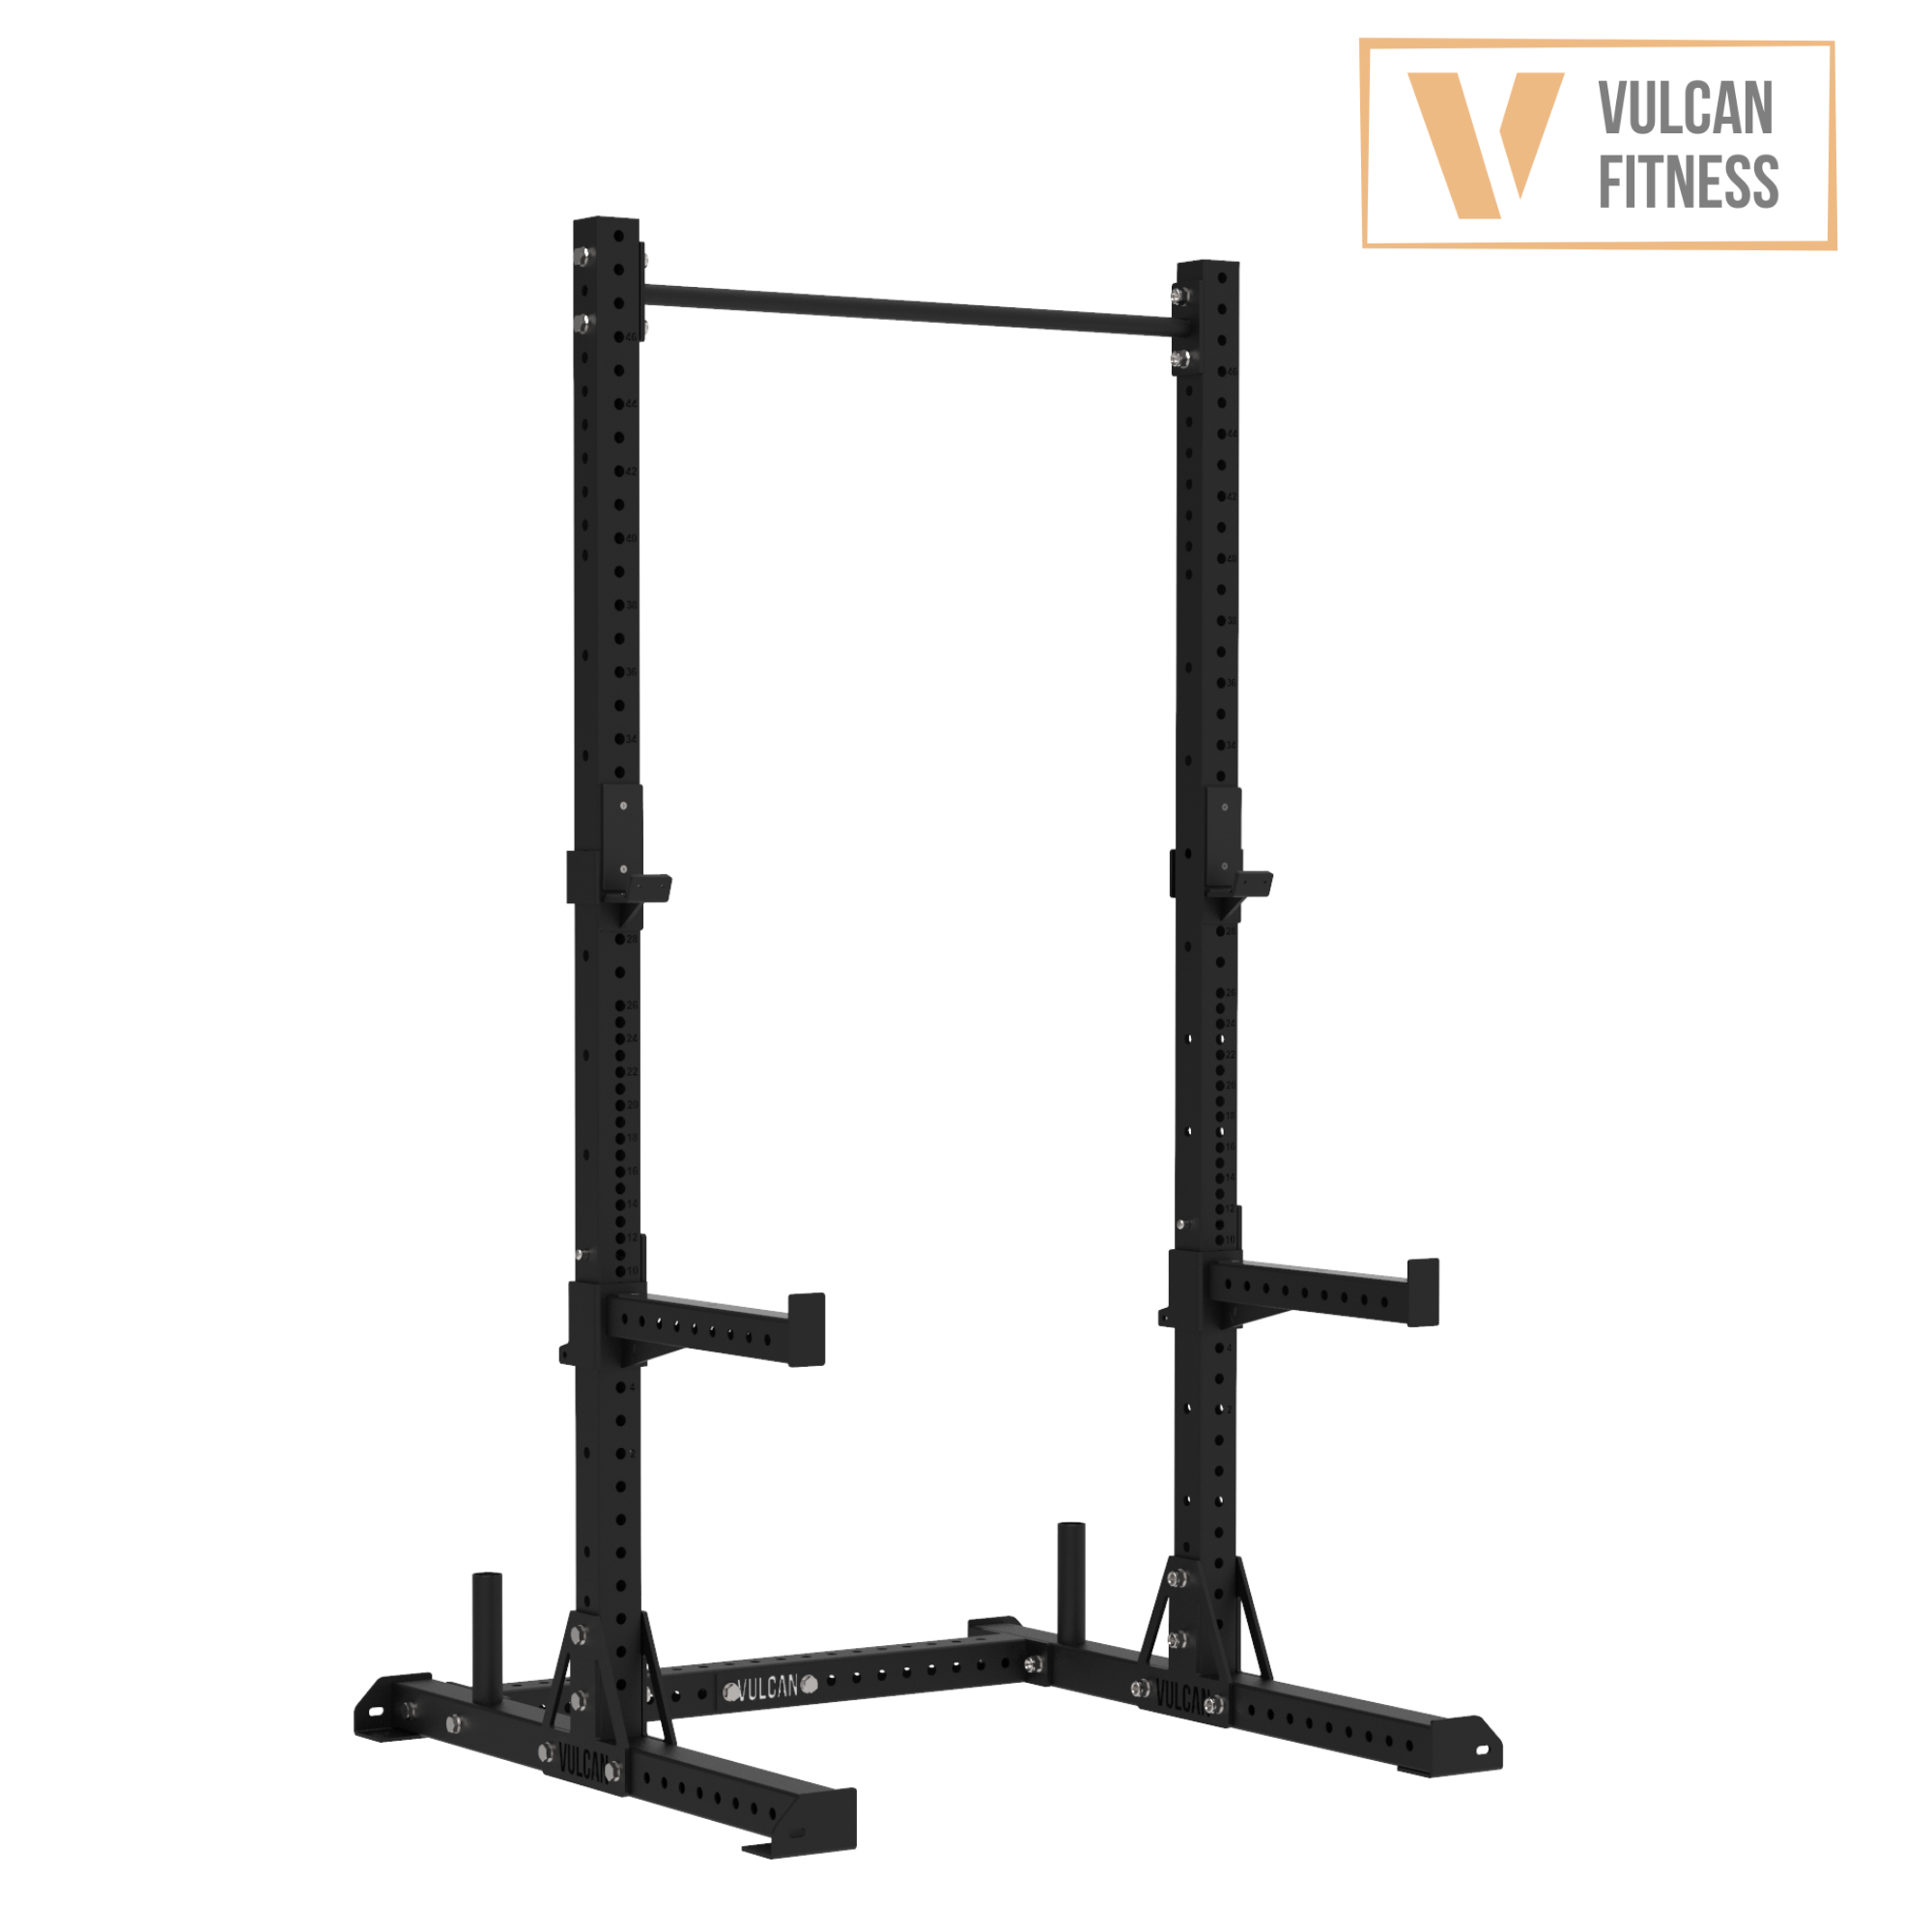 VULCAN Elite Squat Rack, Olympic Barbell, 150kg Black Bumper Weight Plates & Adjustable Bench | IN STOCK